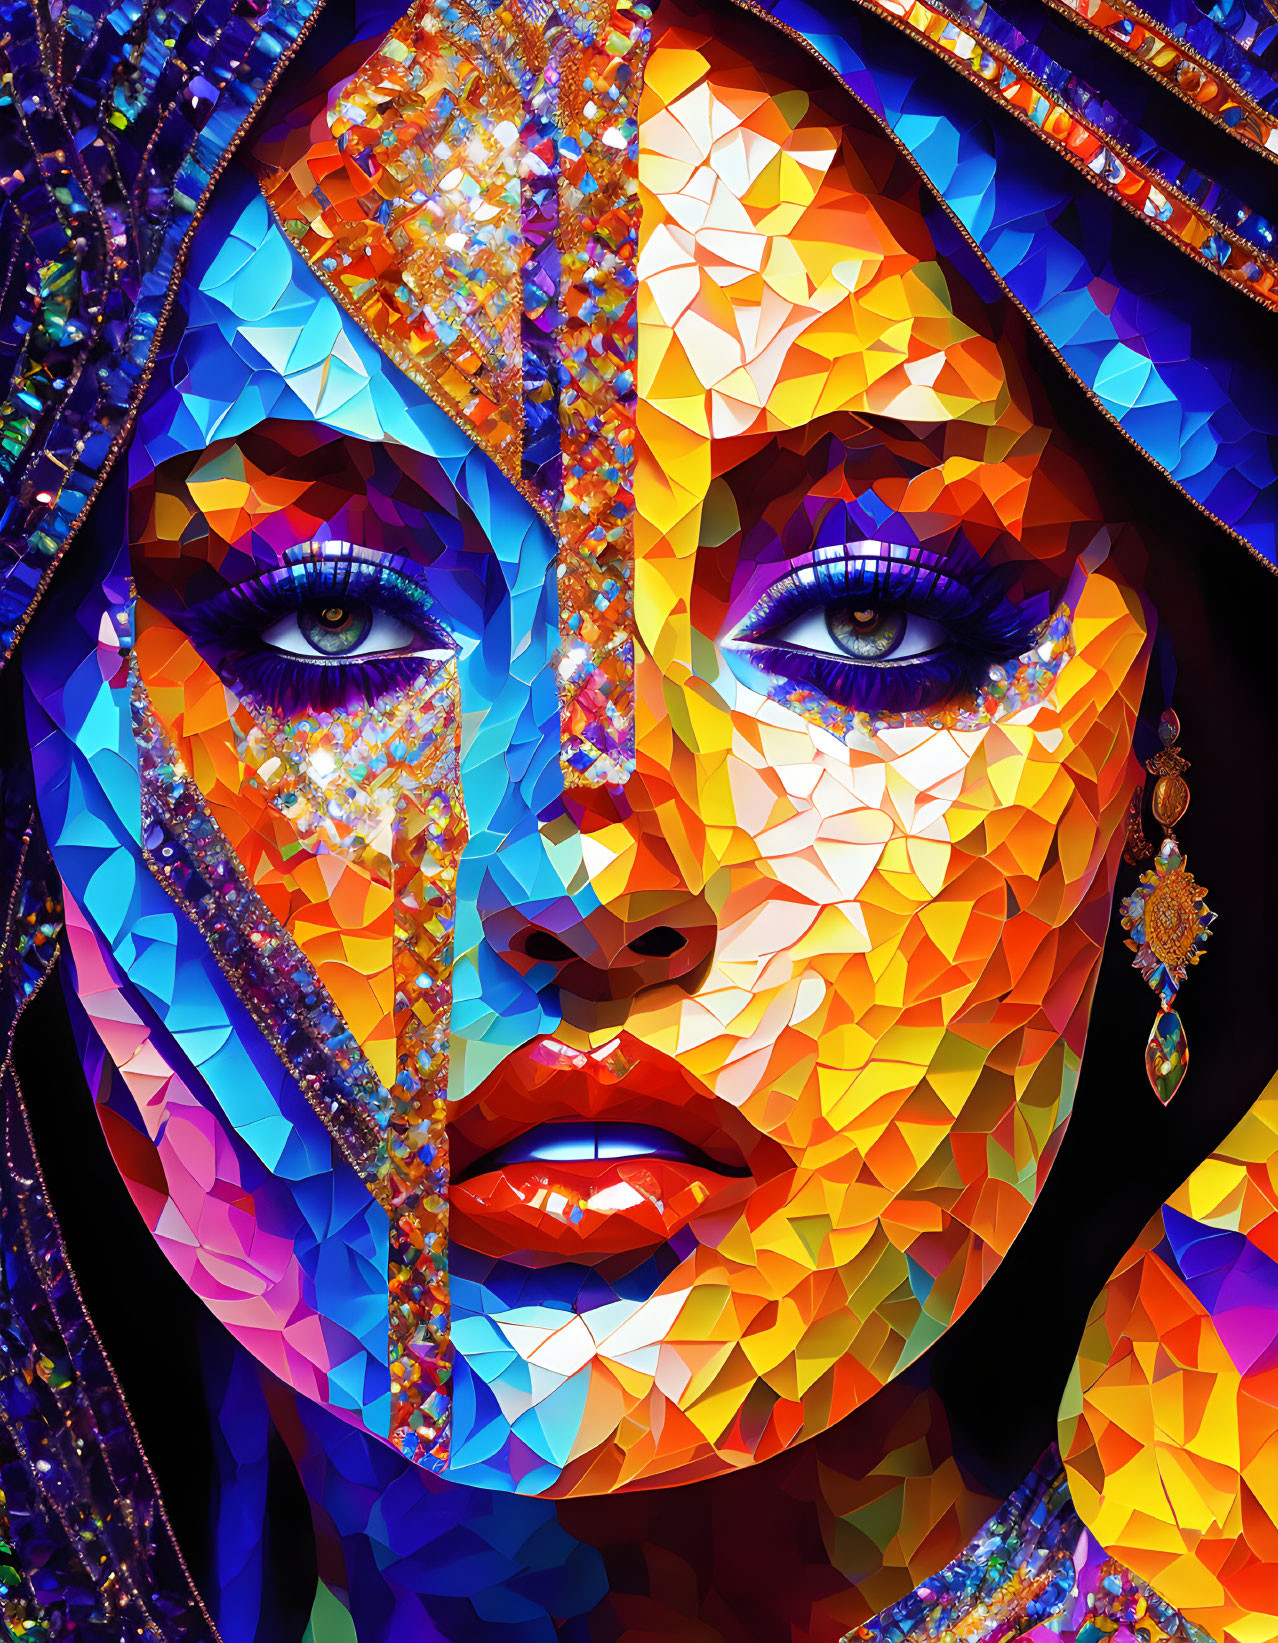 Vibrant digital portrait of a woman with blue eyes and intricate accessories